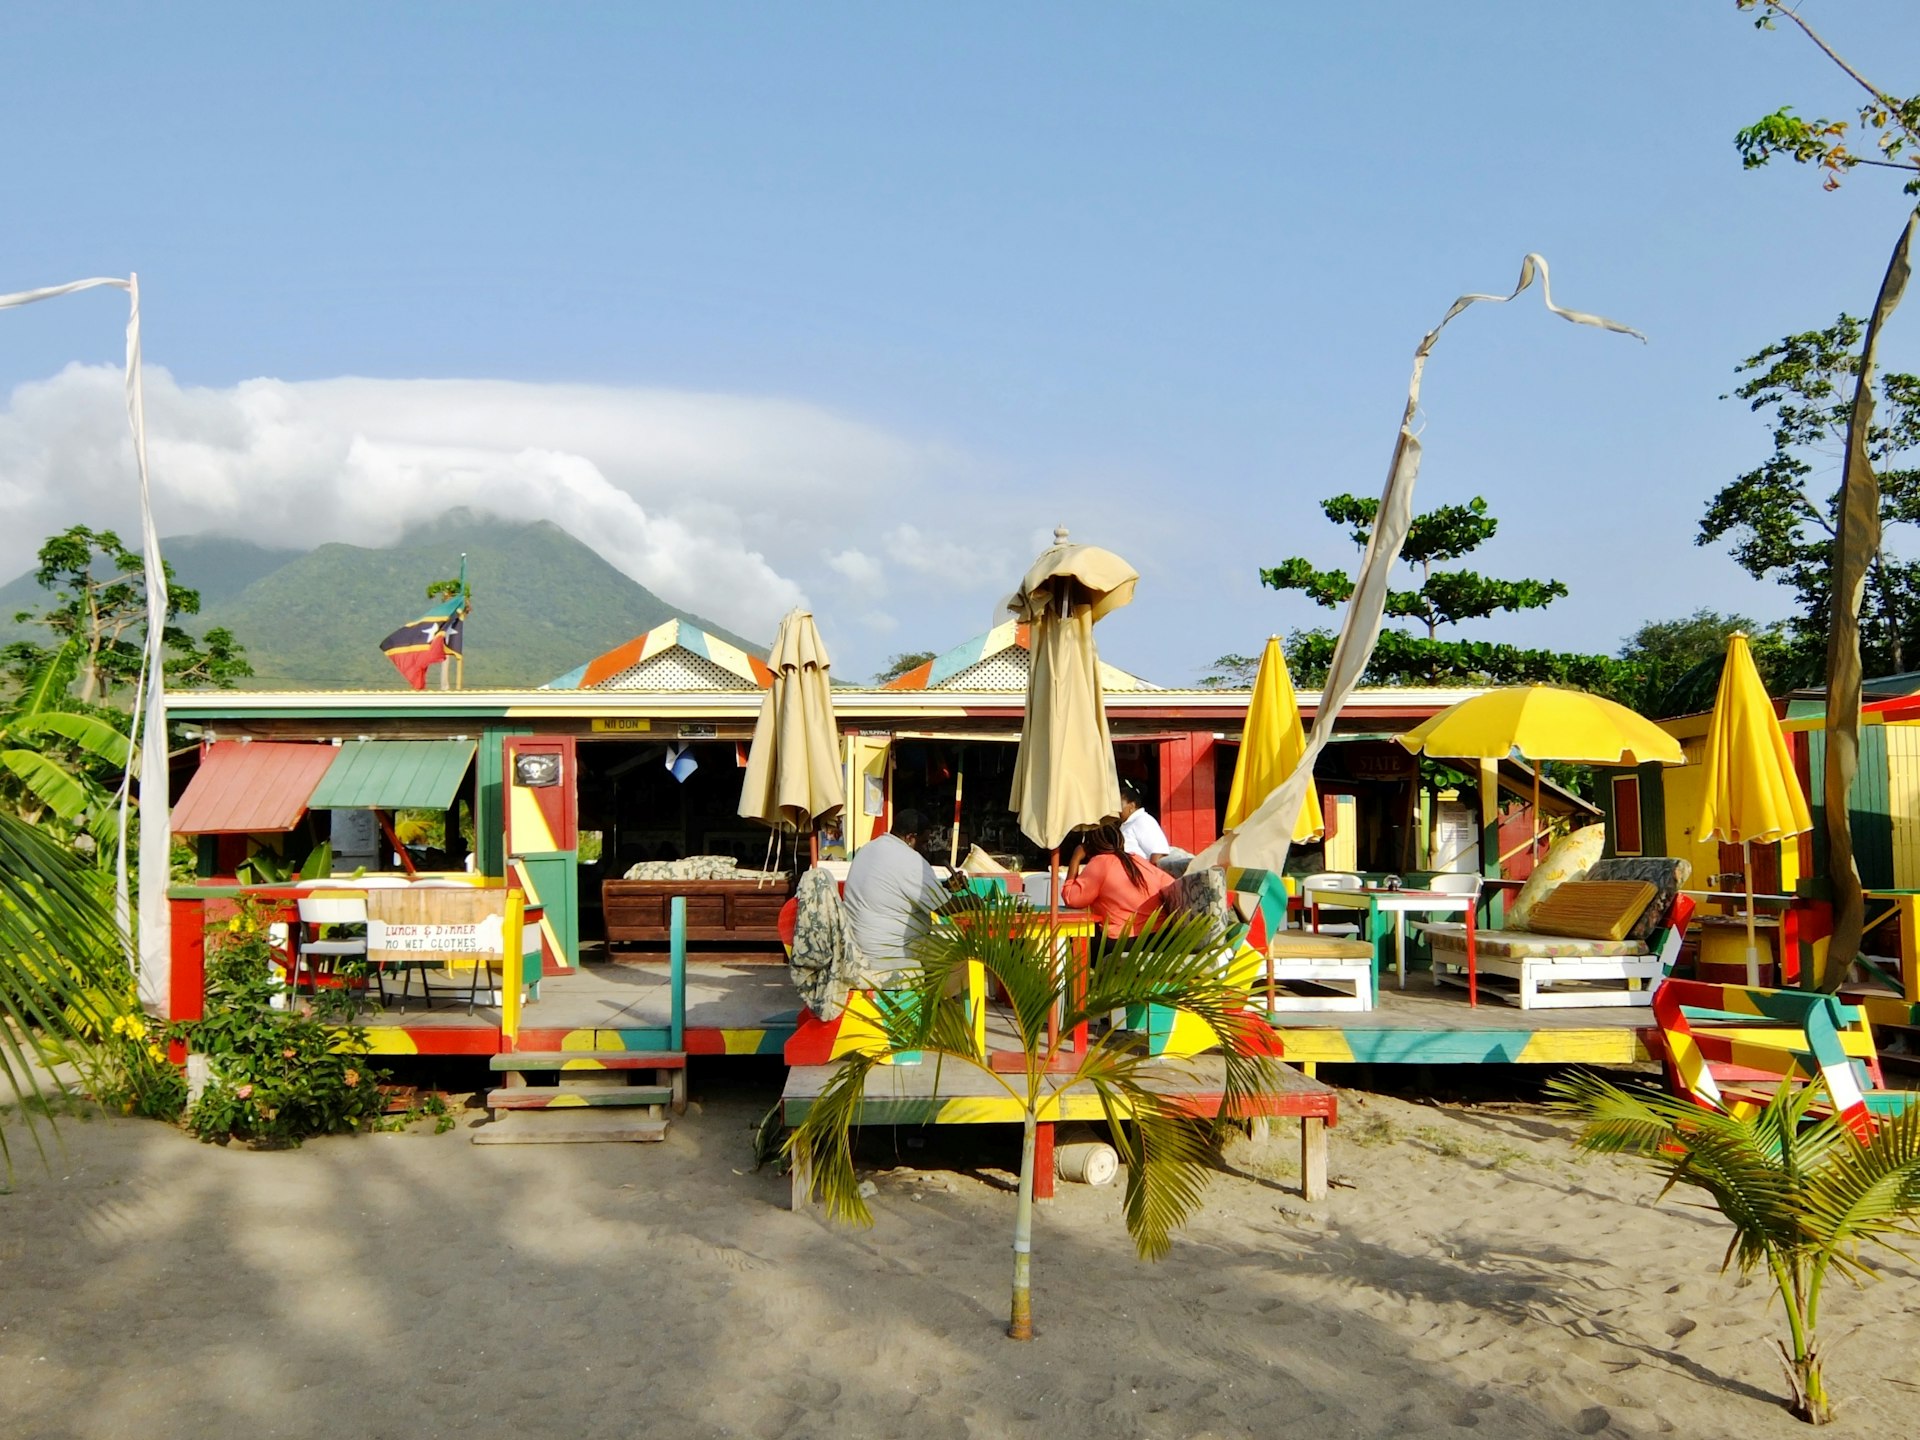 Sunshine's Beach Bar & Grill on Nevis, painted bright yellow, green and red